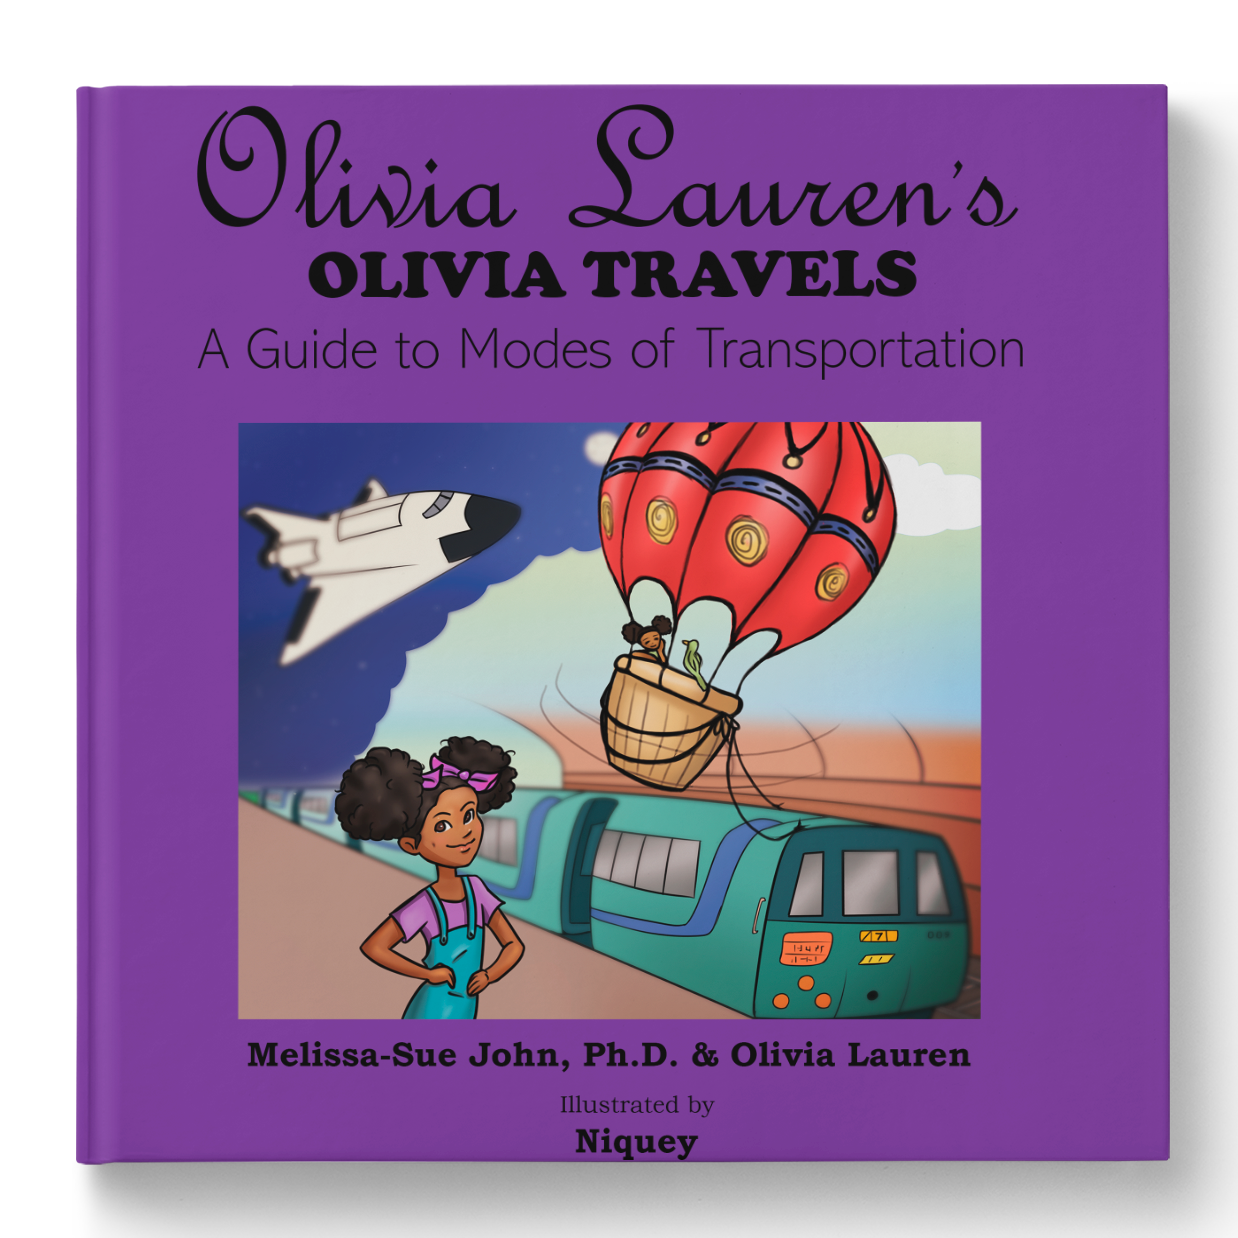 Olivia Lauren's Olivia Travels: A Guide to Modes of Transportation